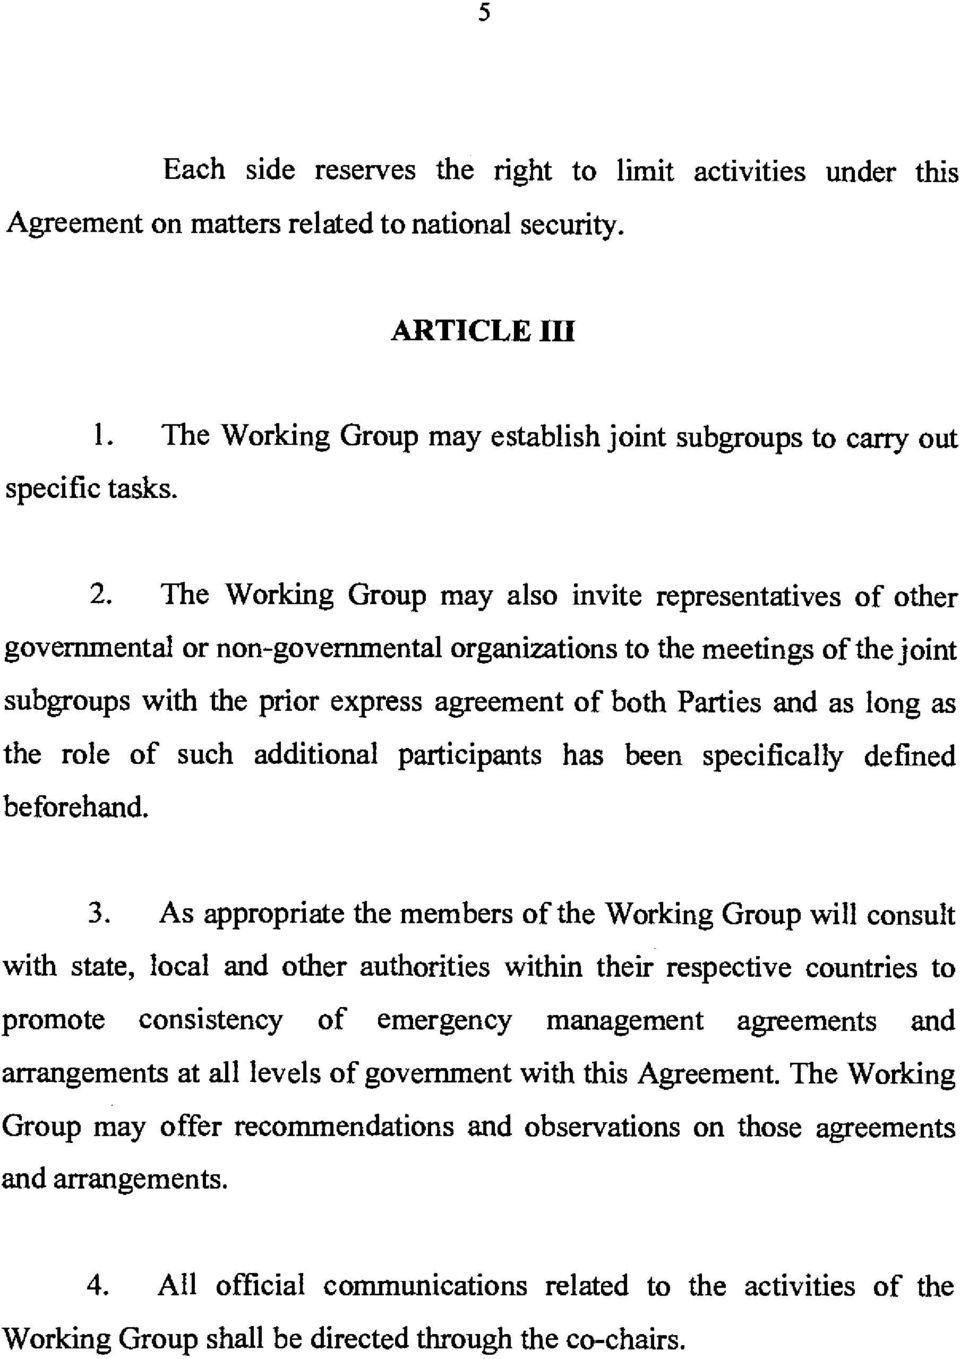 The Working Group may also invite representatives of other governmental or non-governmental organizations to the meetings of the joint subgroups with the prior express agreement of both Parties and